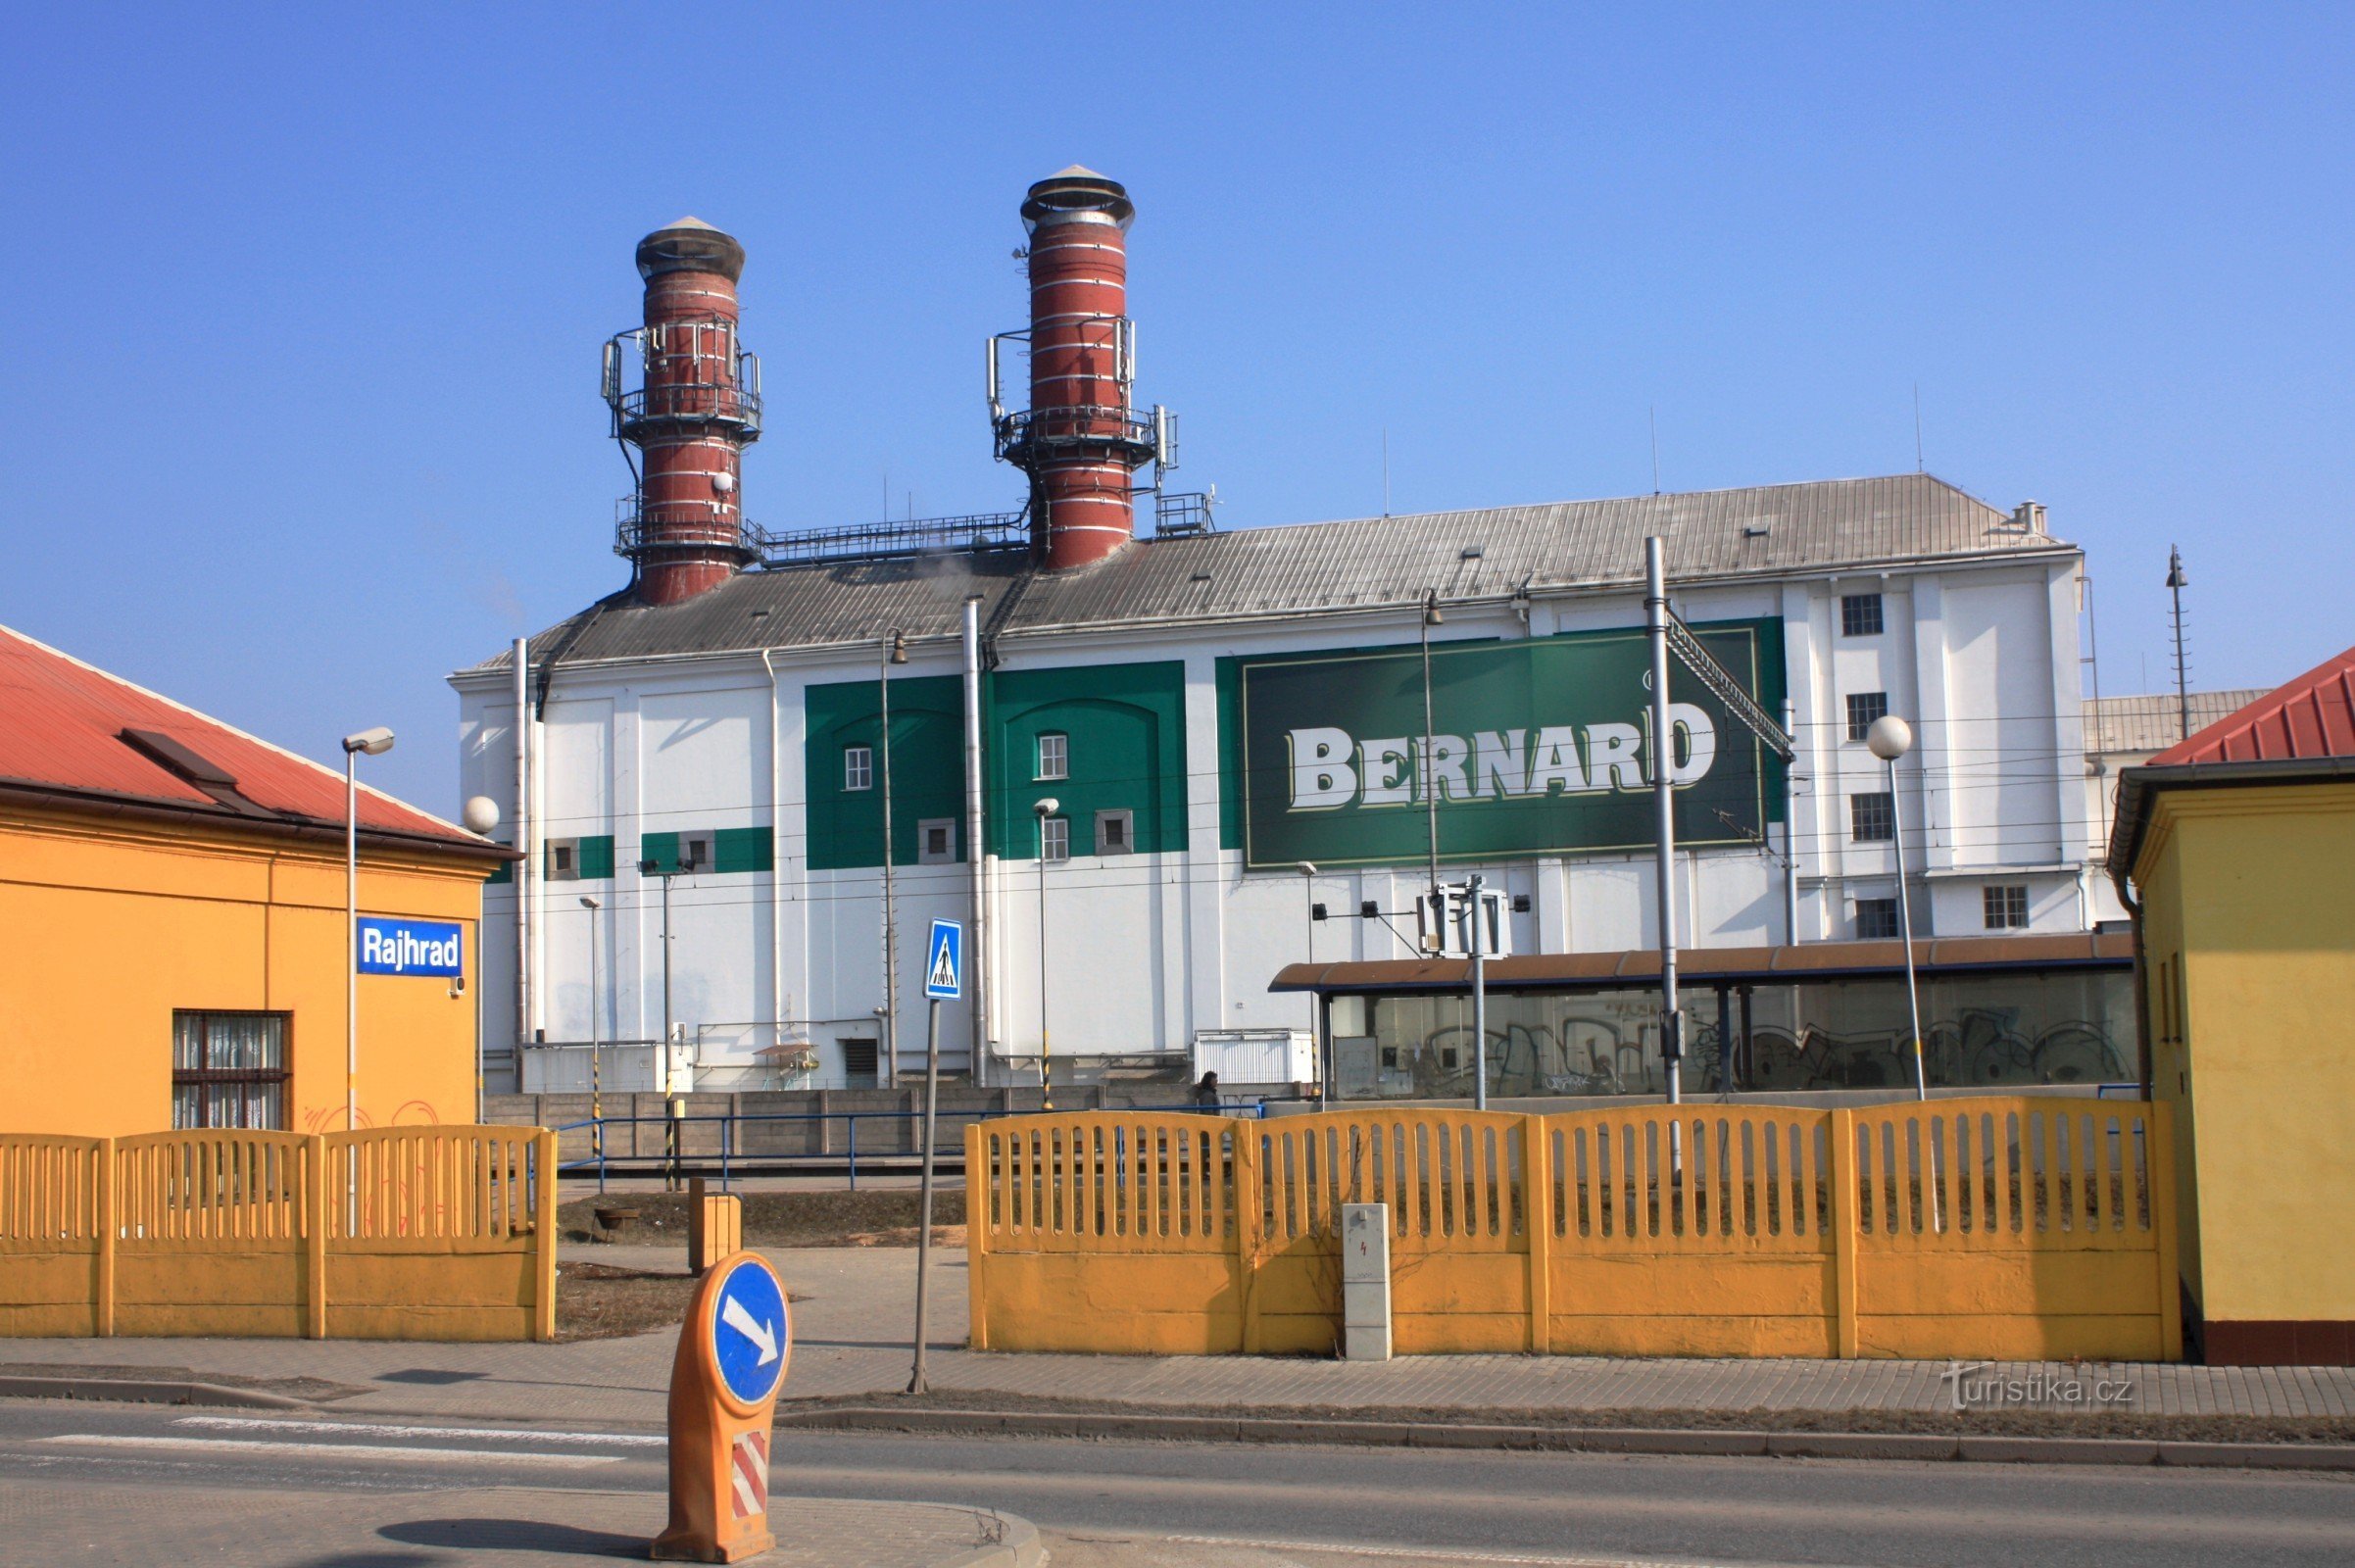 Rajhrad Railway Station is dominated by the building of the malt house